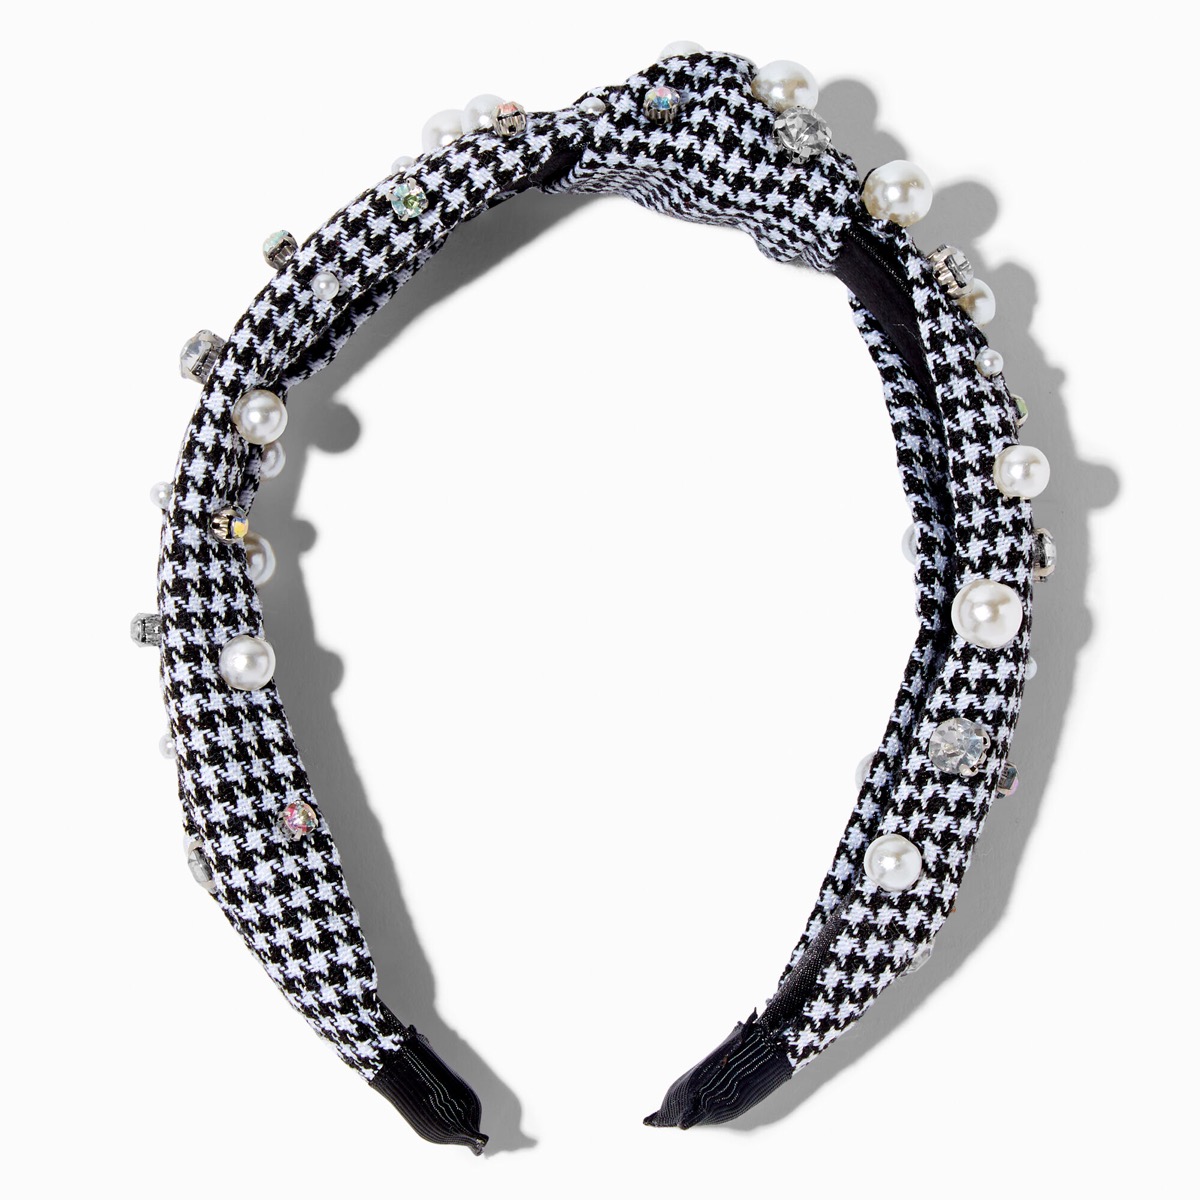 Claires Houndstooth Embellished Knotted Headband